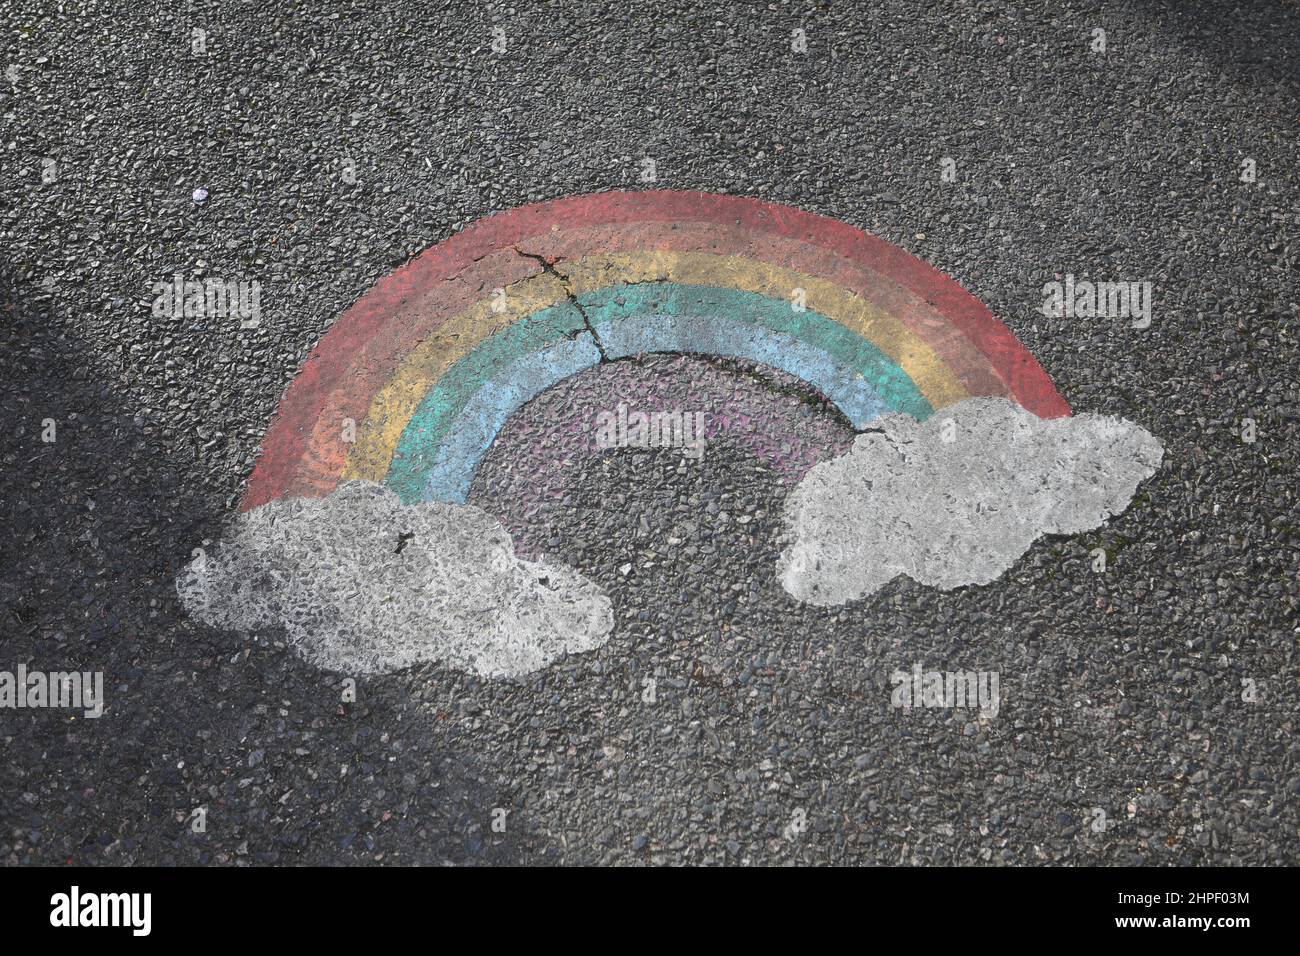 A rainbow painted on the floor of a playground in Harrow, London, UK. Stock Photo